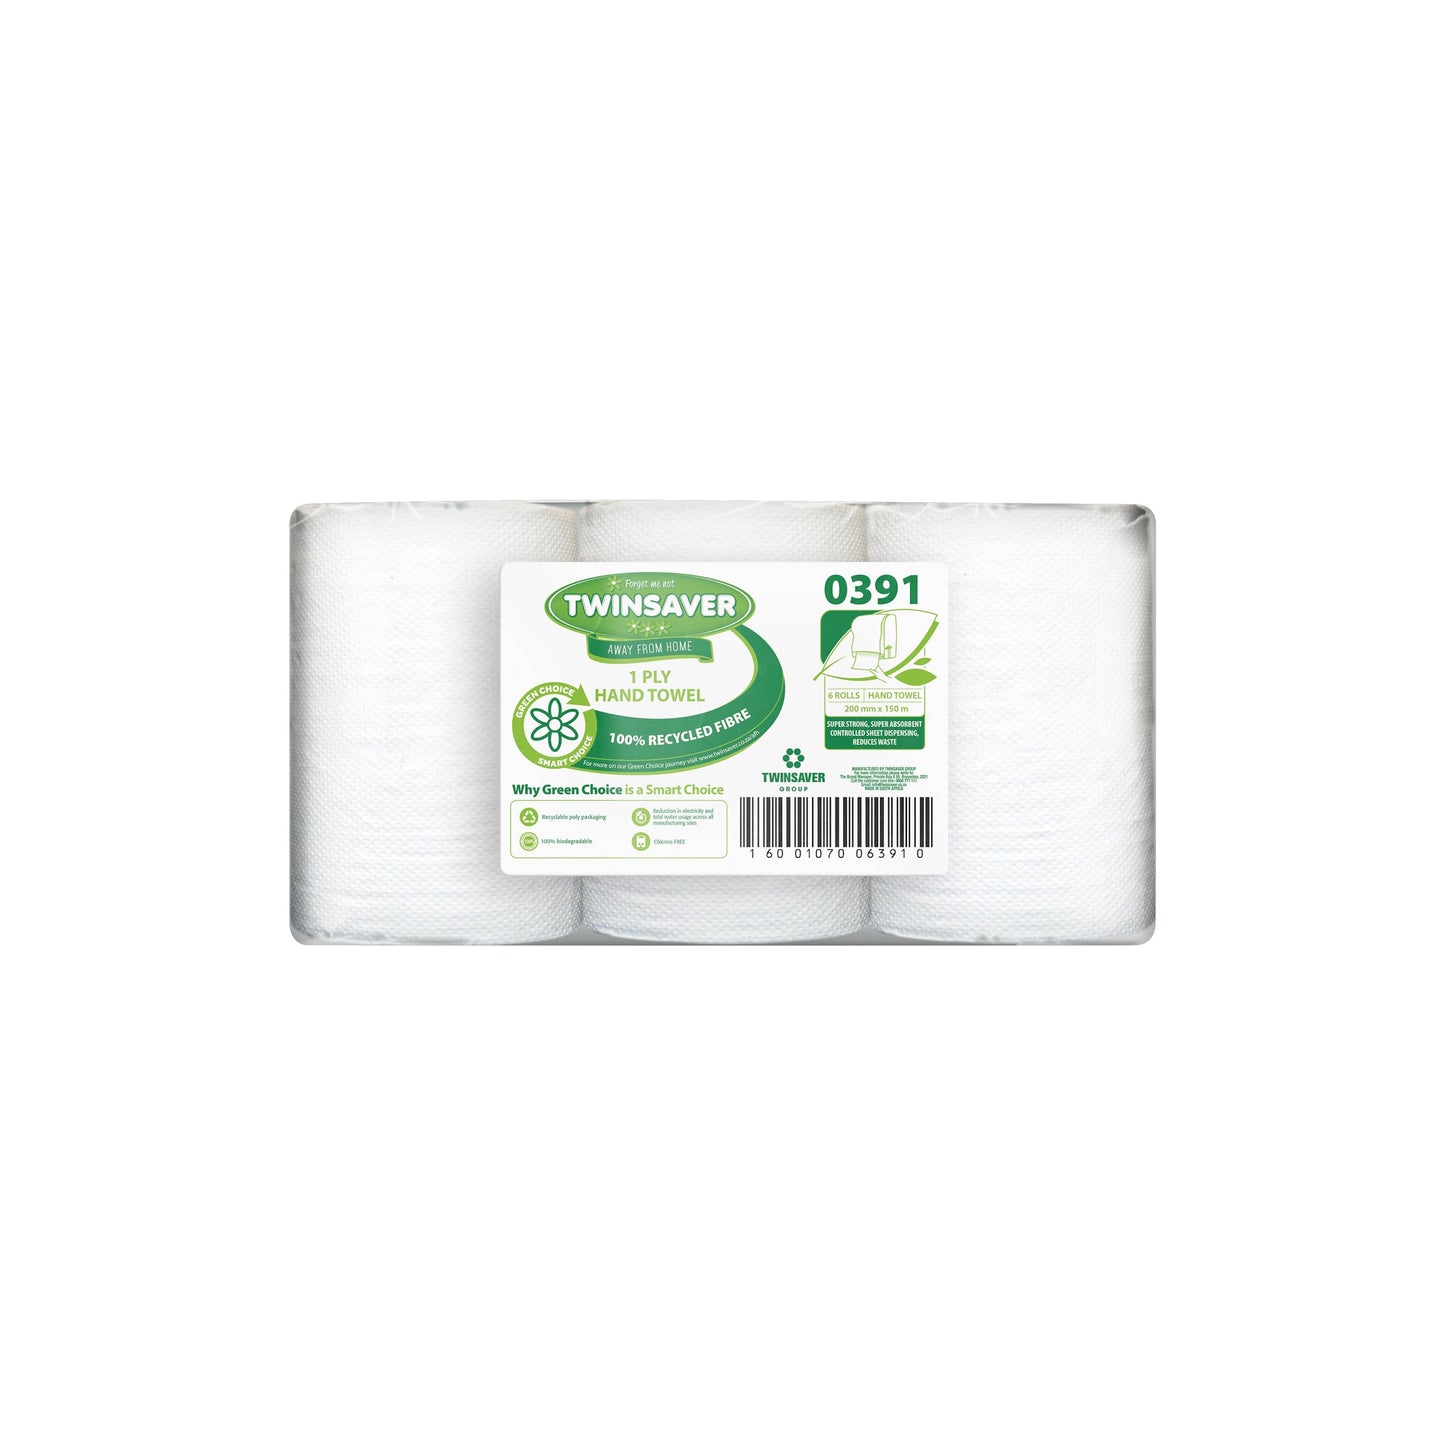 Twinsaver Control 1 Ply Hand Towel (Pack of 6 Rolls) (Code 0391)